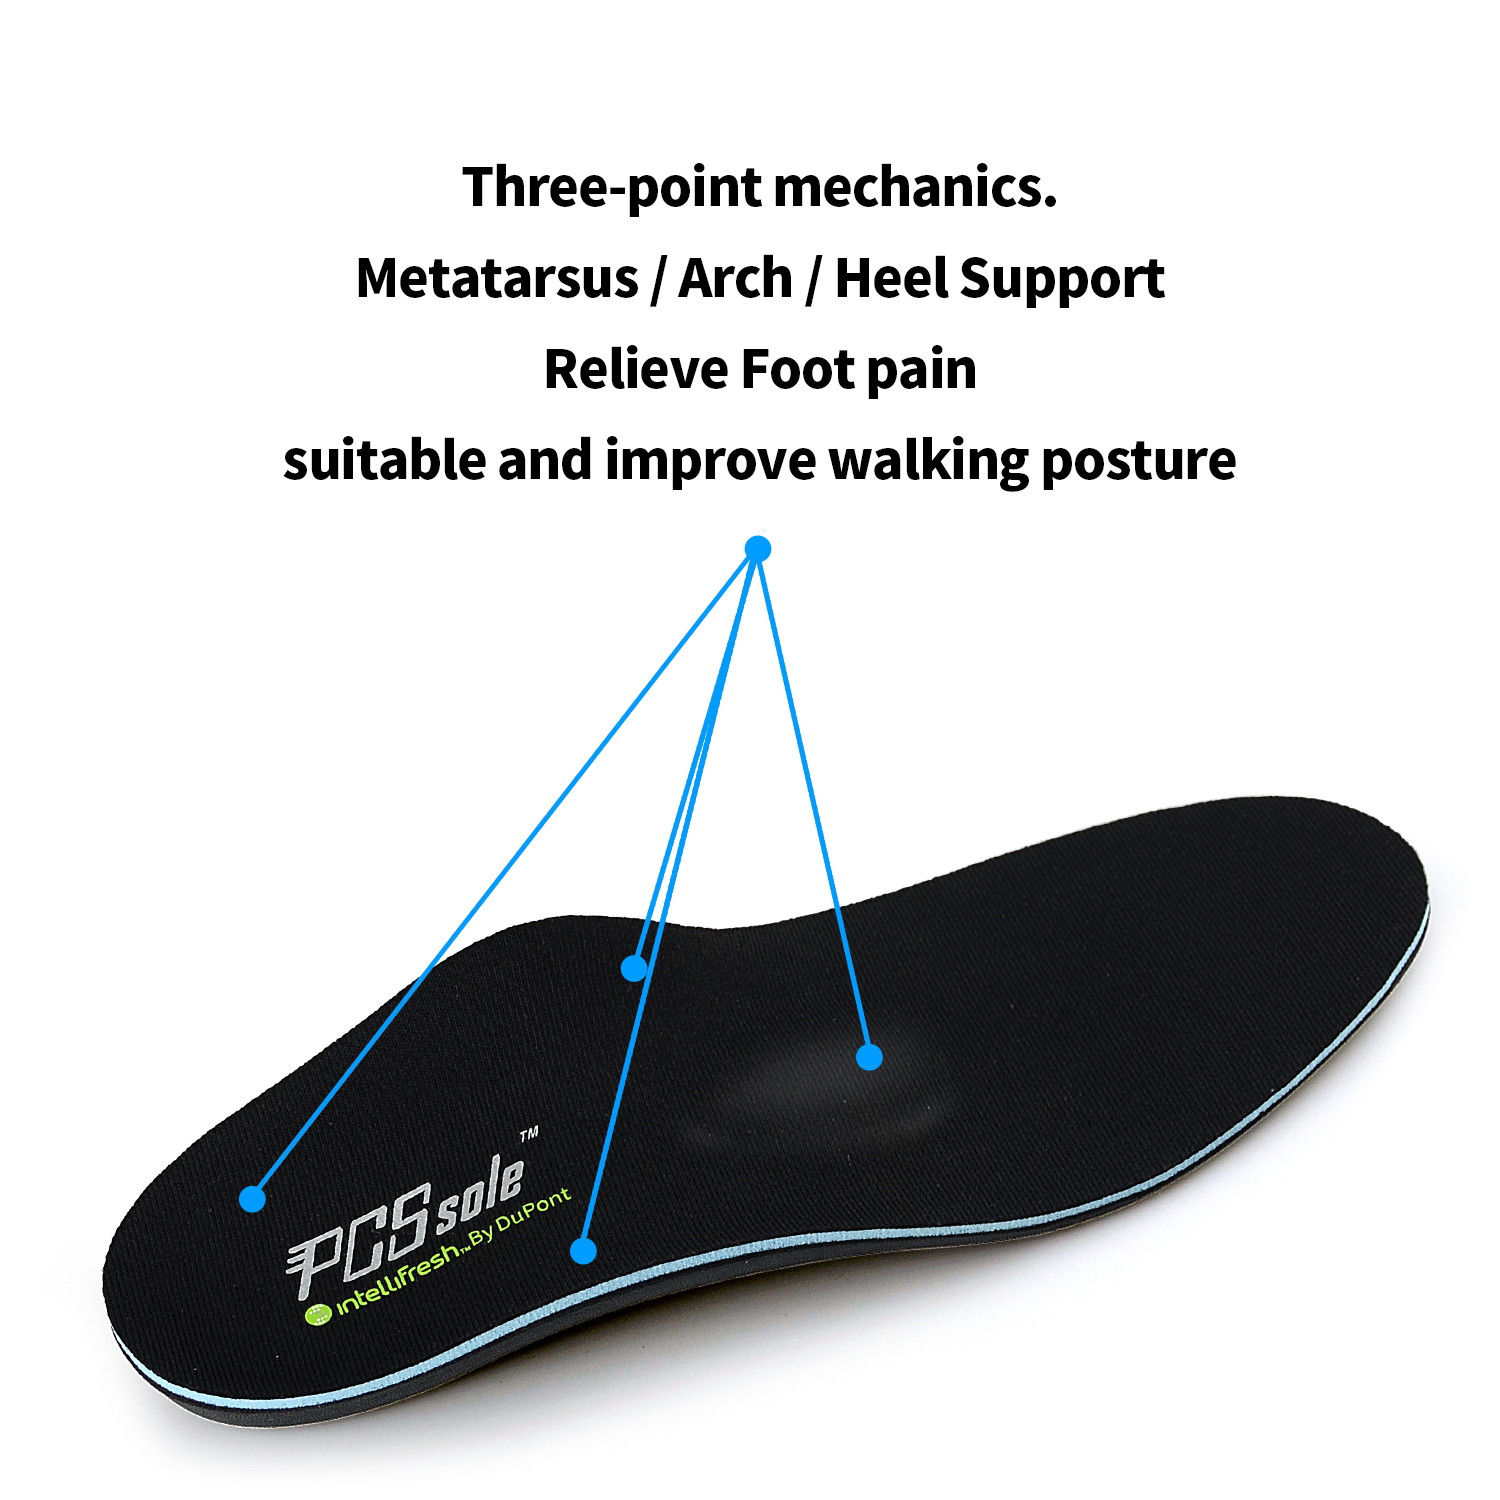 come4buy.com-Flat Foot Orthopedic Insoles For Feet Arch Support